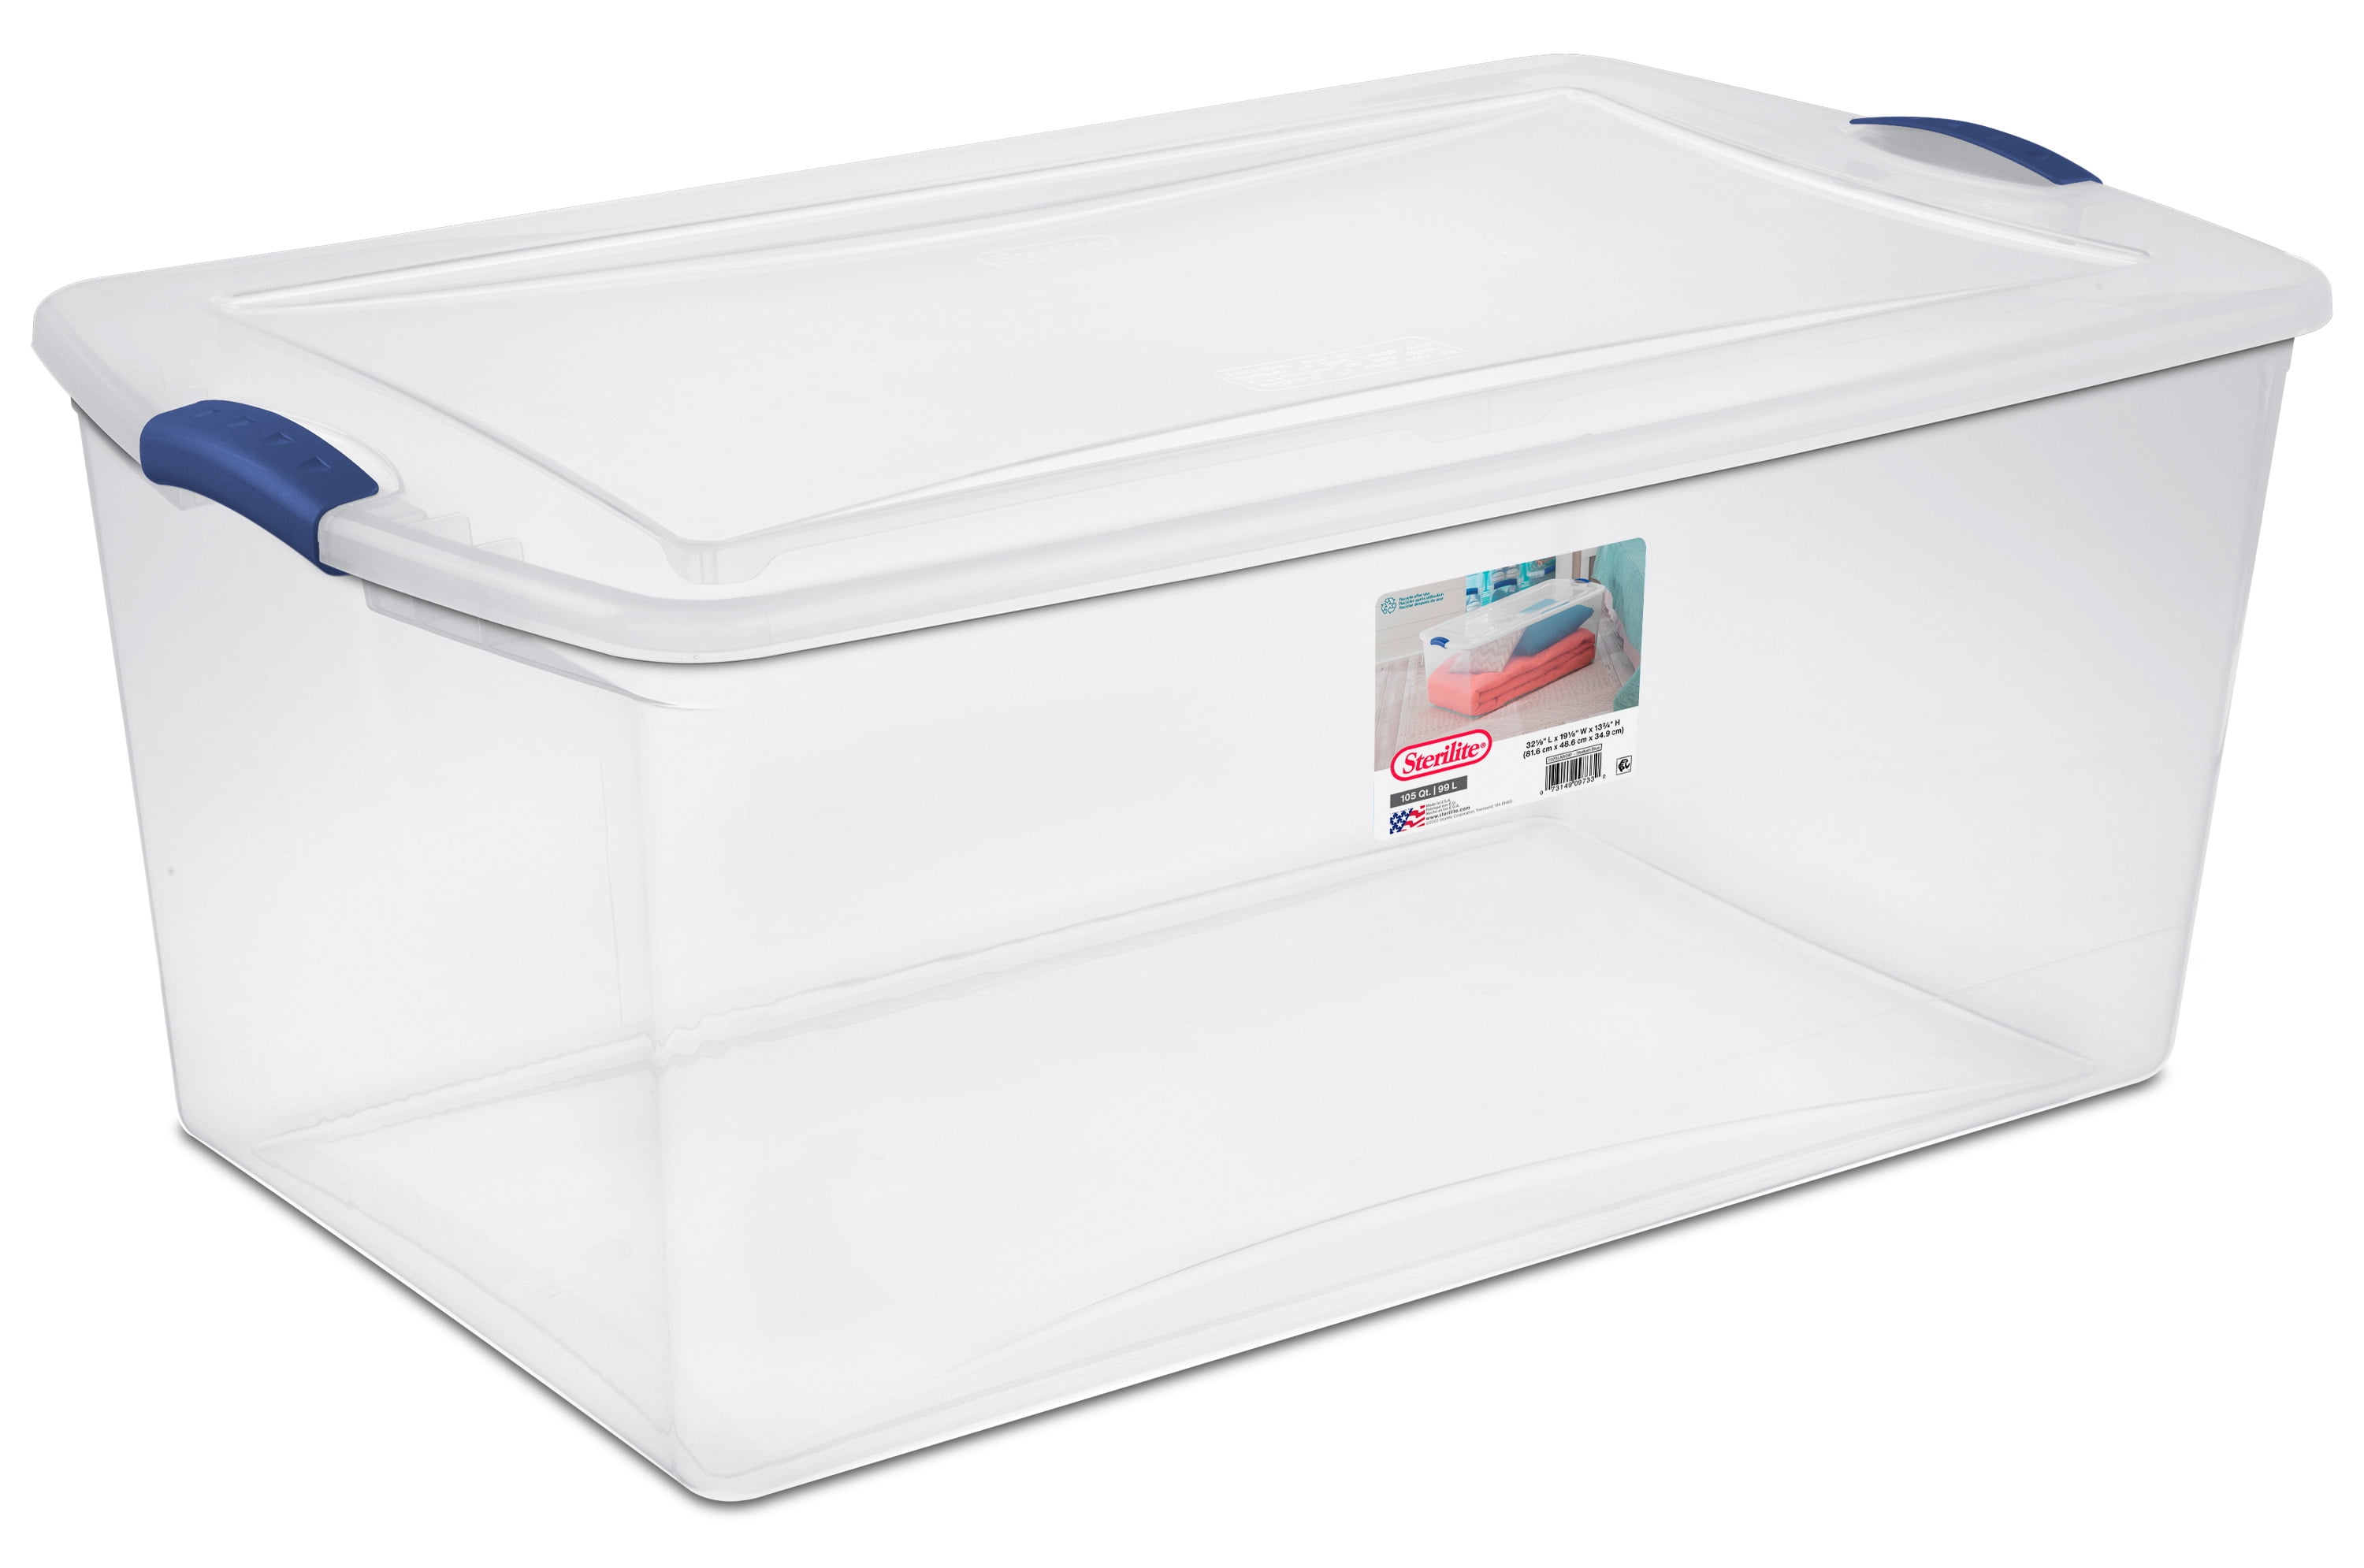 Sterilite 105 Qt. Clear Plastic Latching Box, Blue Latches with Clear Lid 